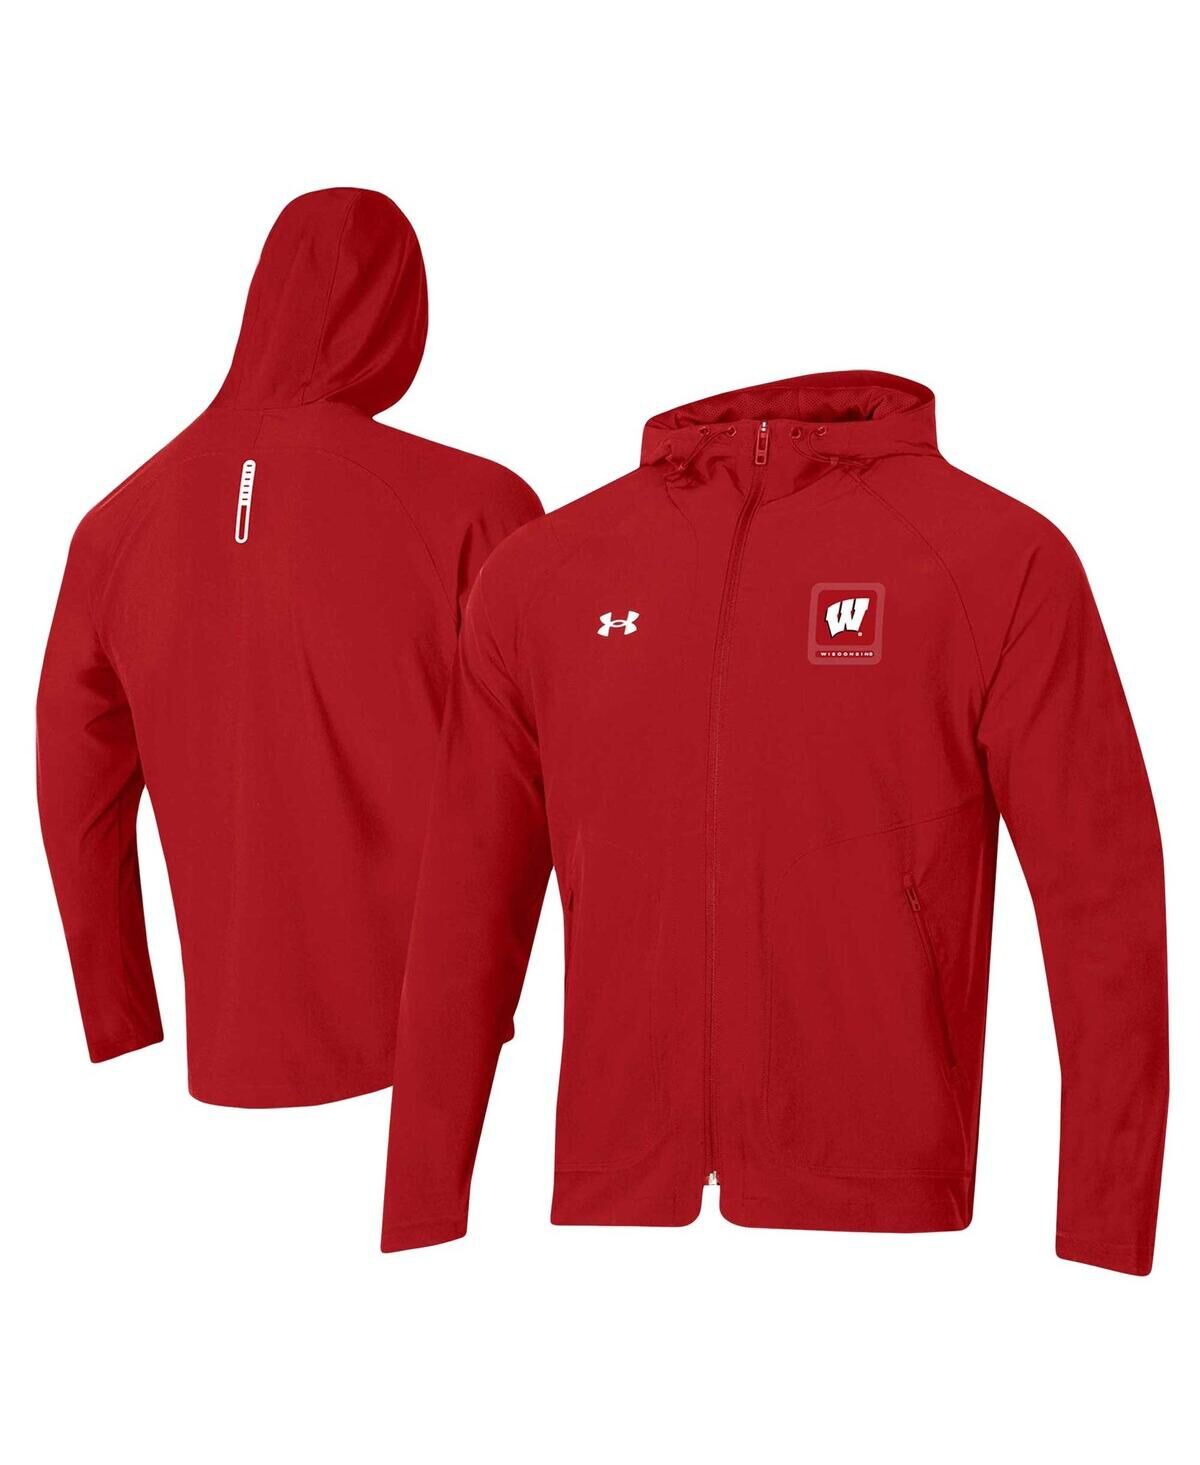 Under Armour Men's Under Armour Red Wisconsin Badgers Unstoppable Raglan Full-Zip Jacket - Red